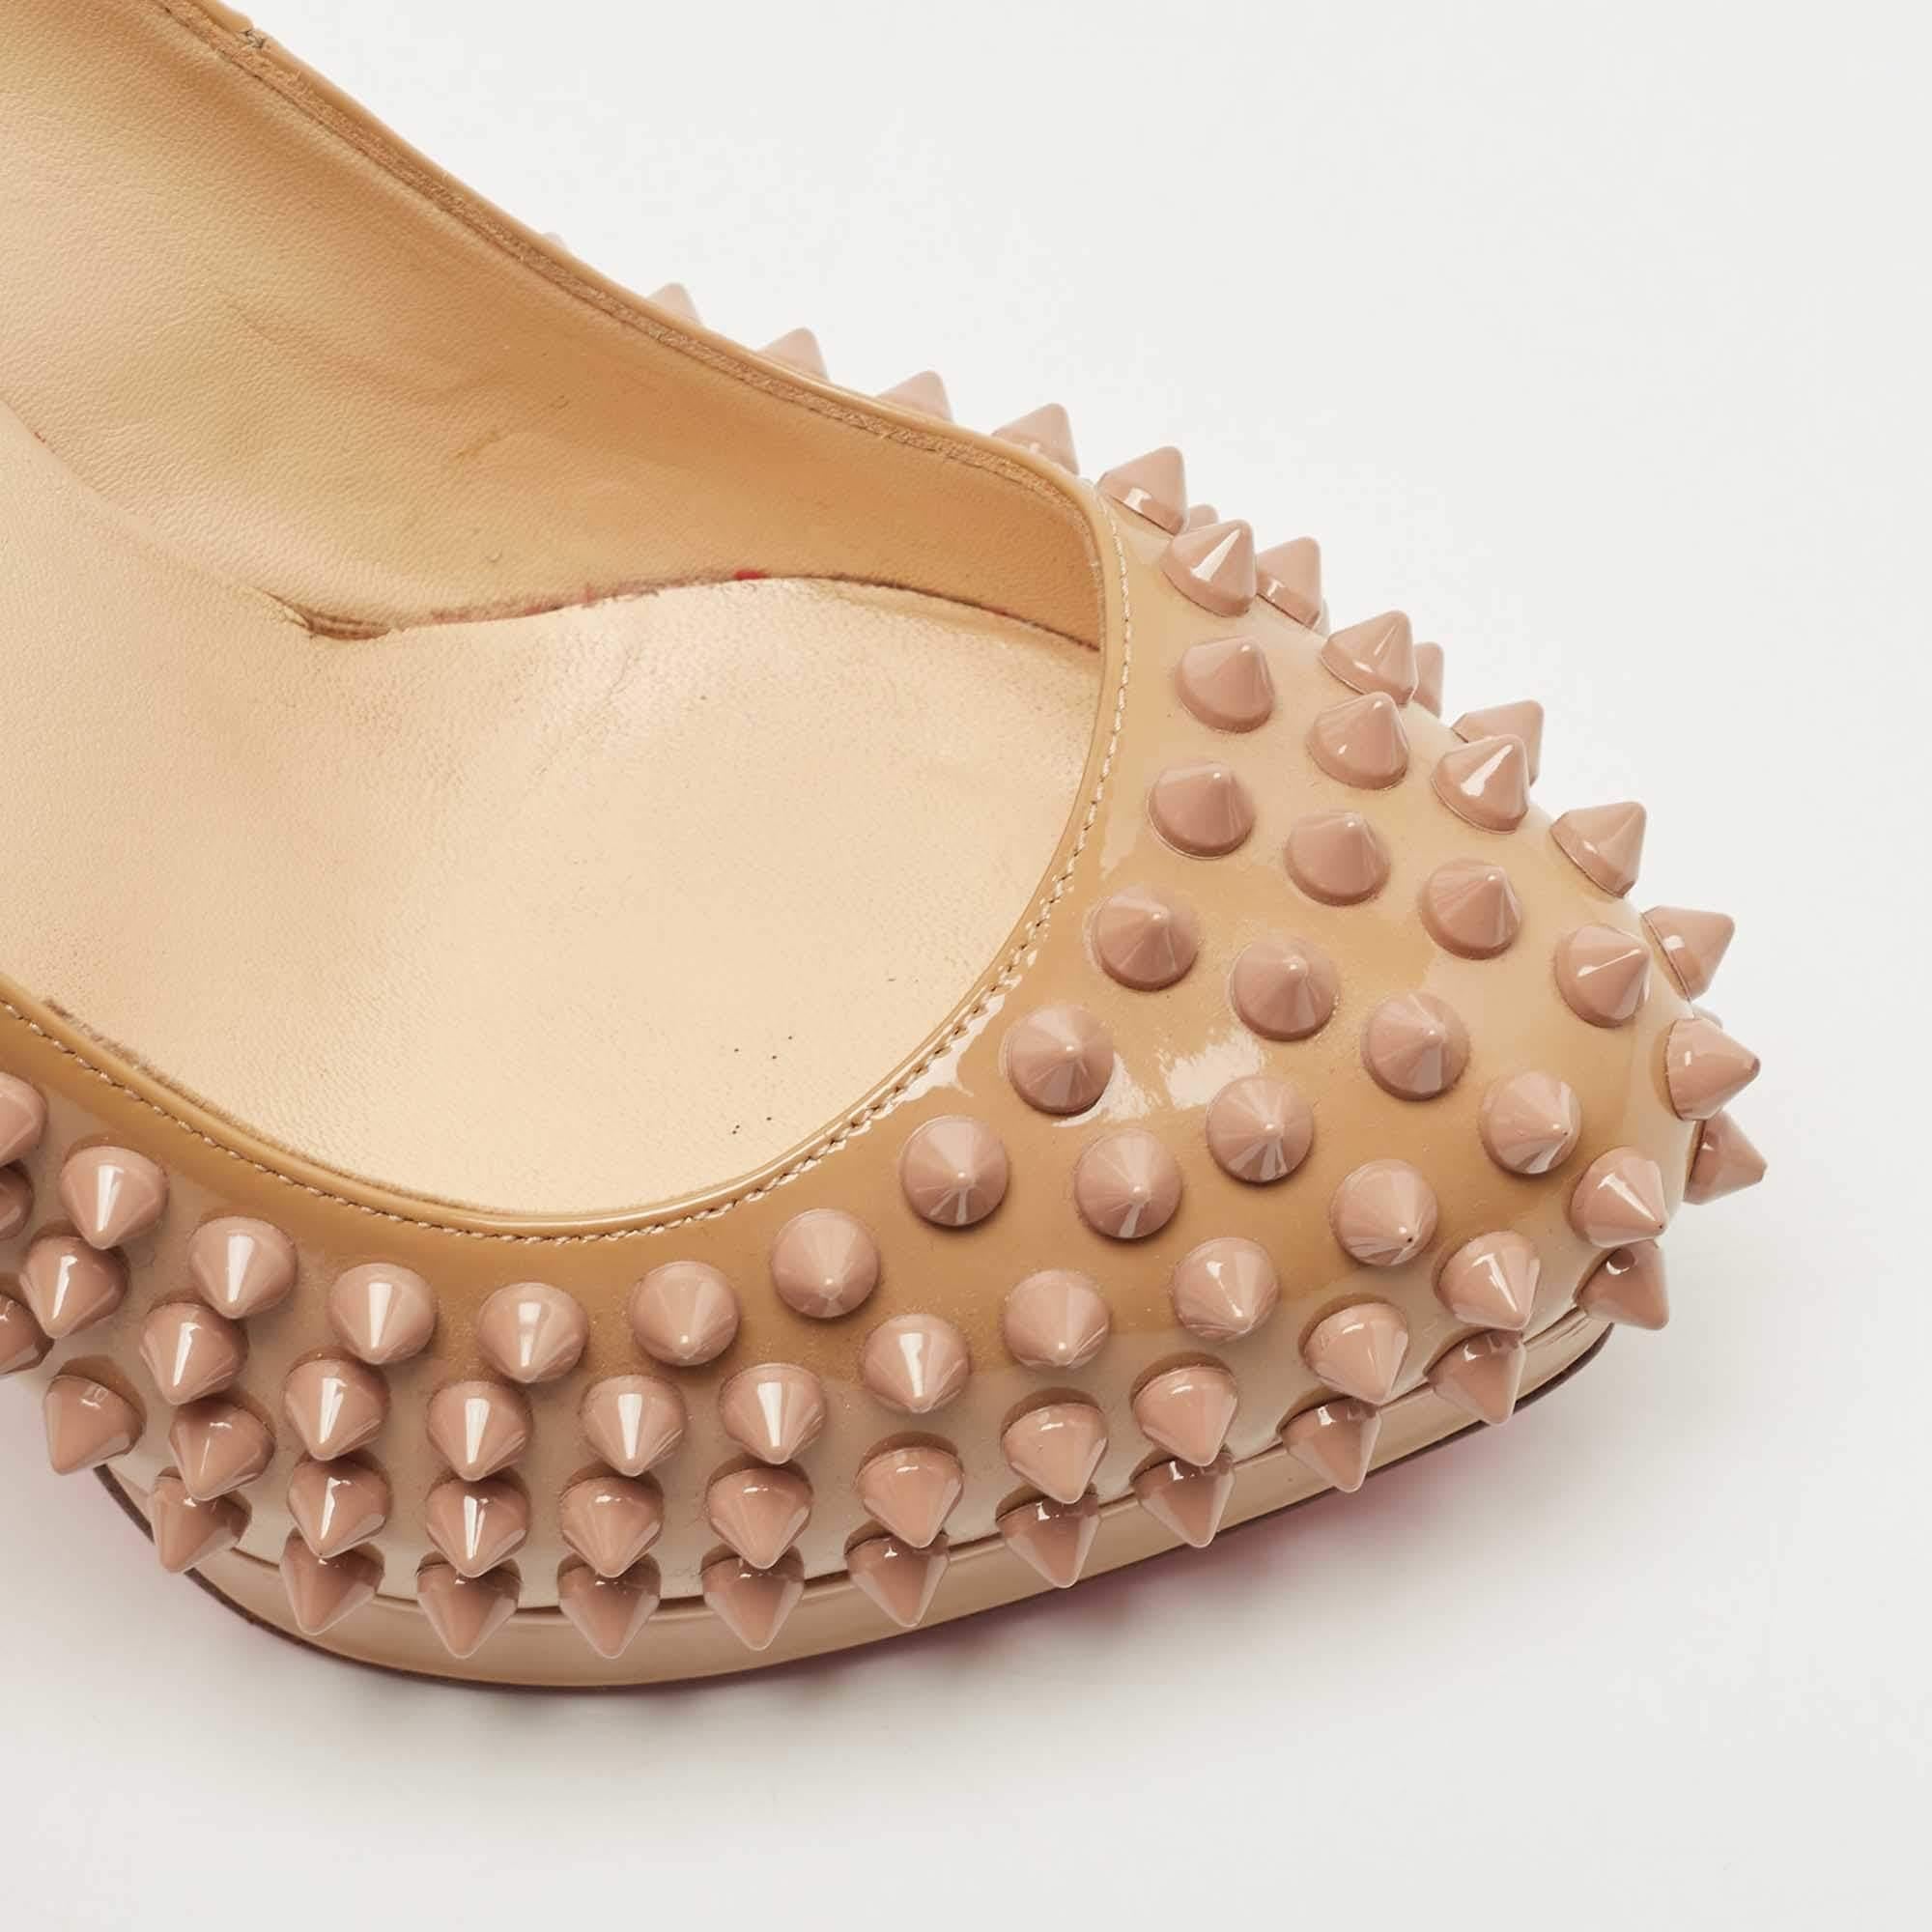 Christian Louboutin Beige Patent Leather Alti Spiked Platform Pumps Size 36 For Sale 3